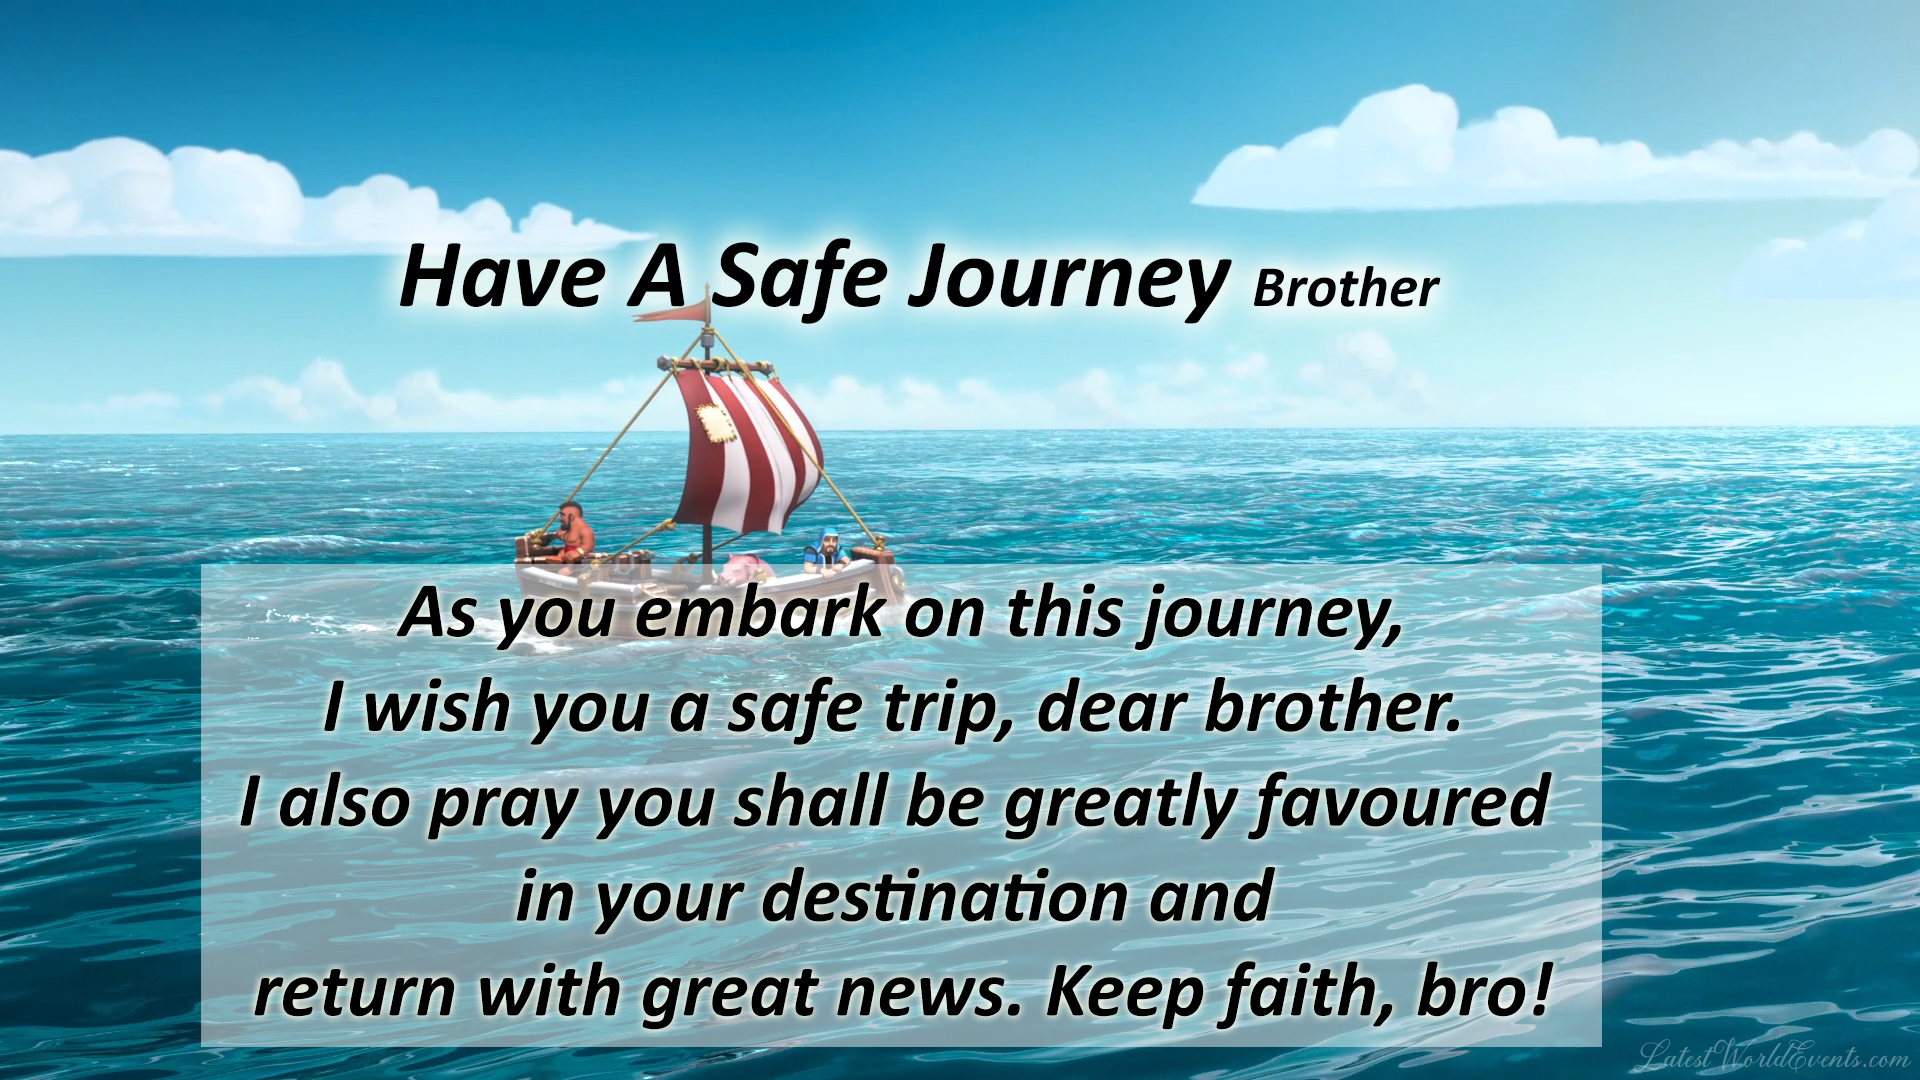 safe journey wishes brother